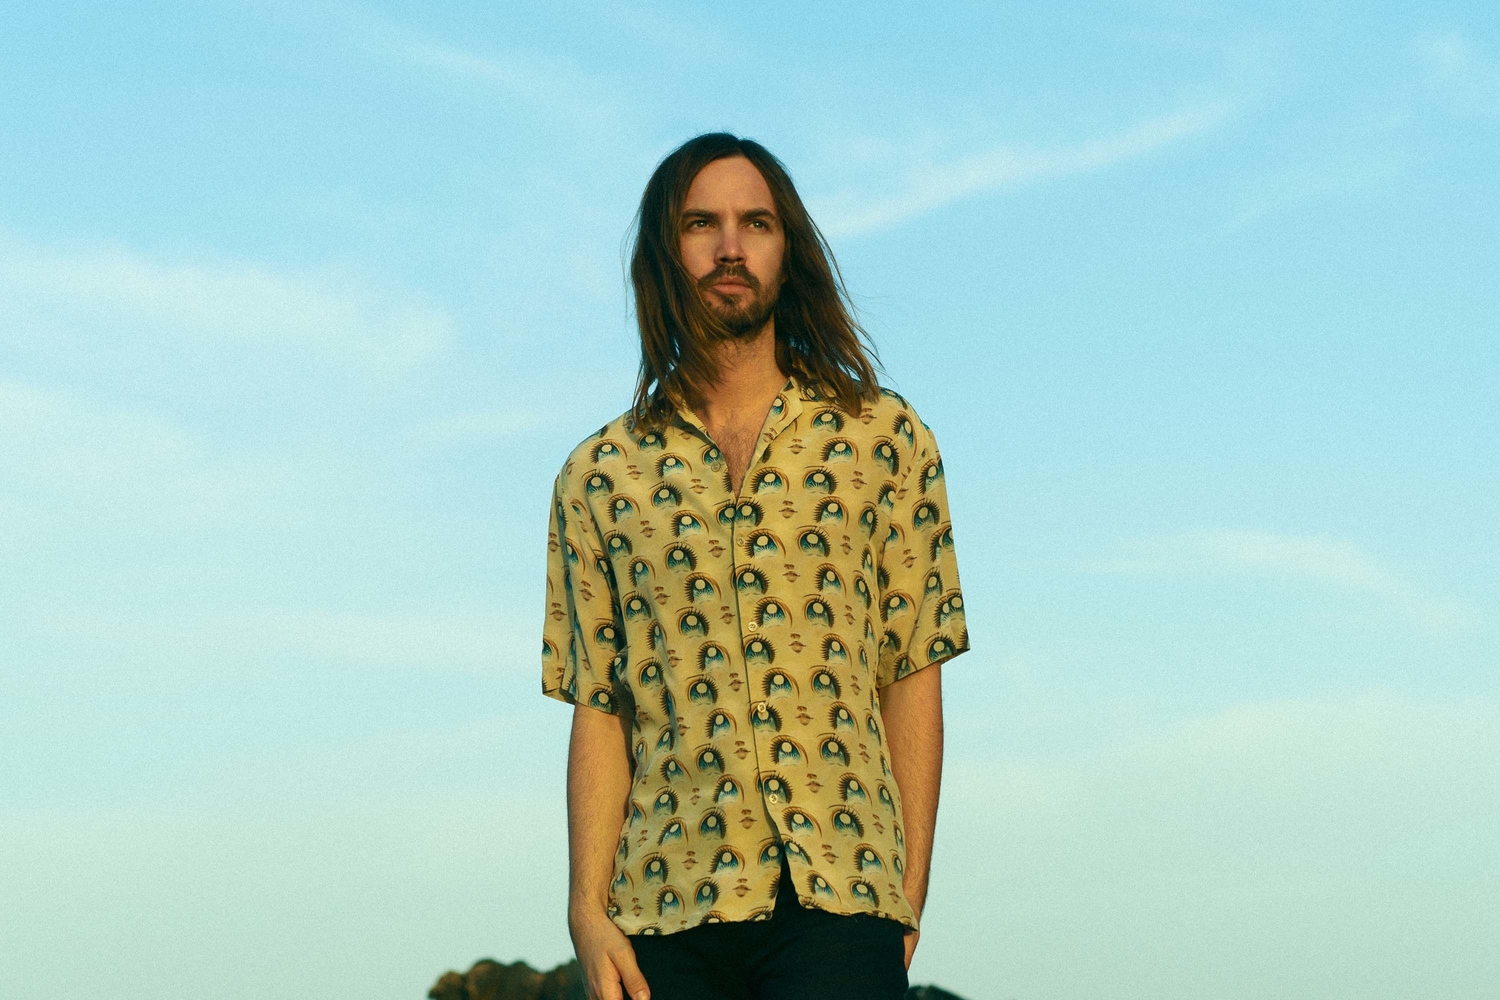 Tame Impala share new track ‘Lost In Yesterday’